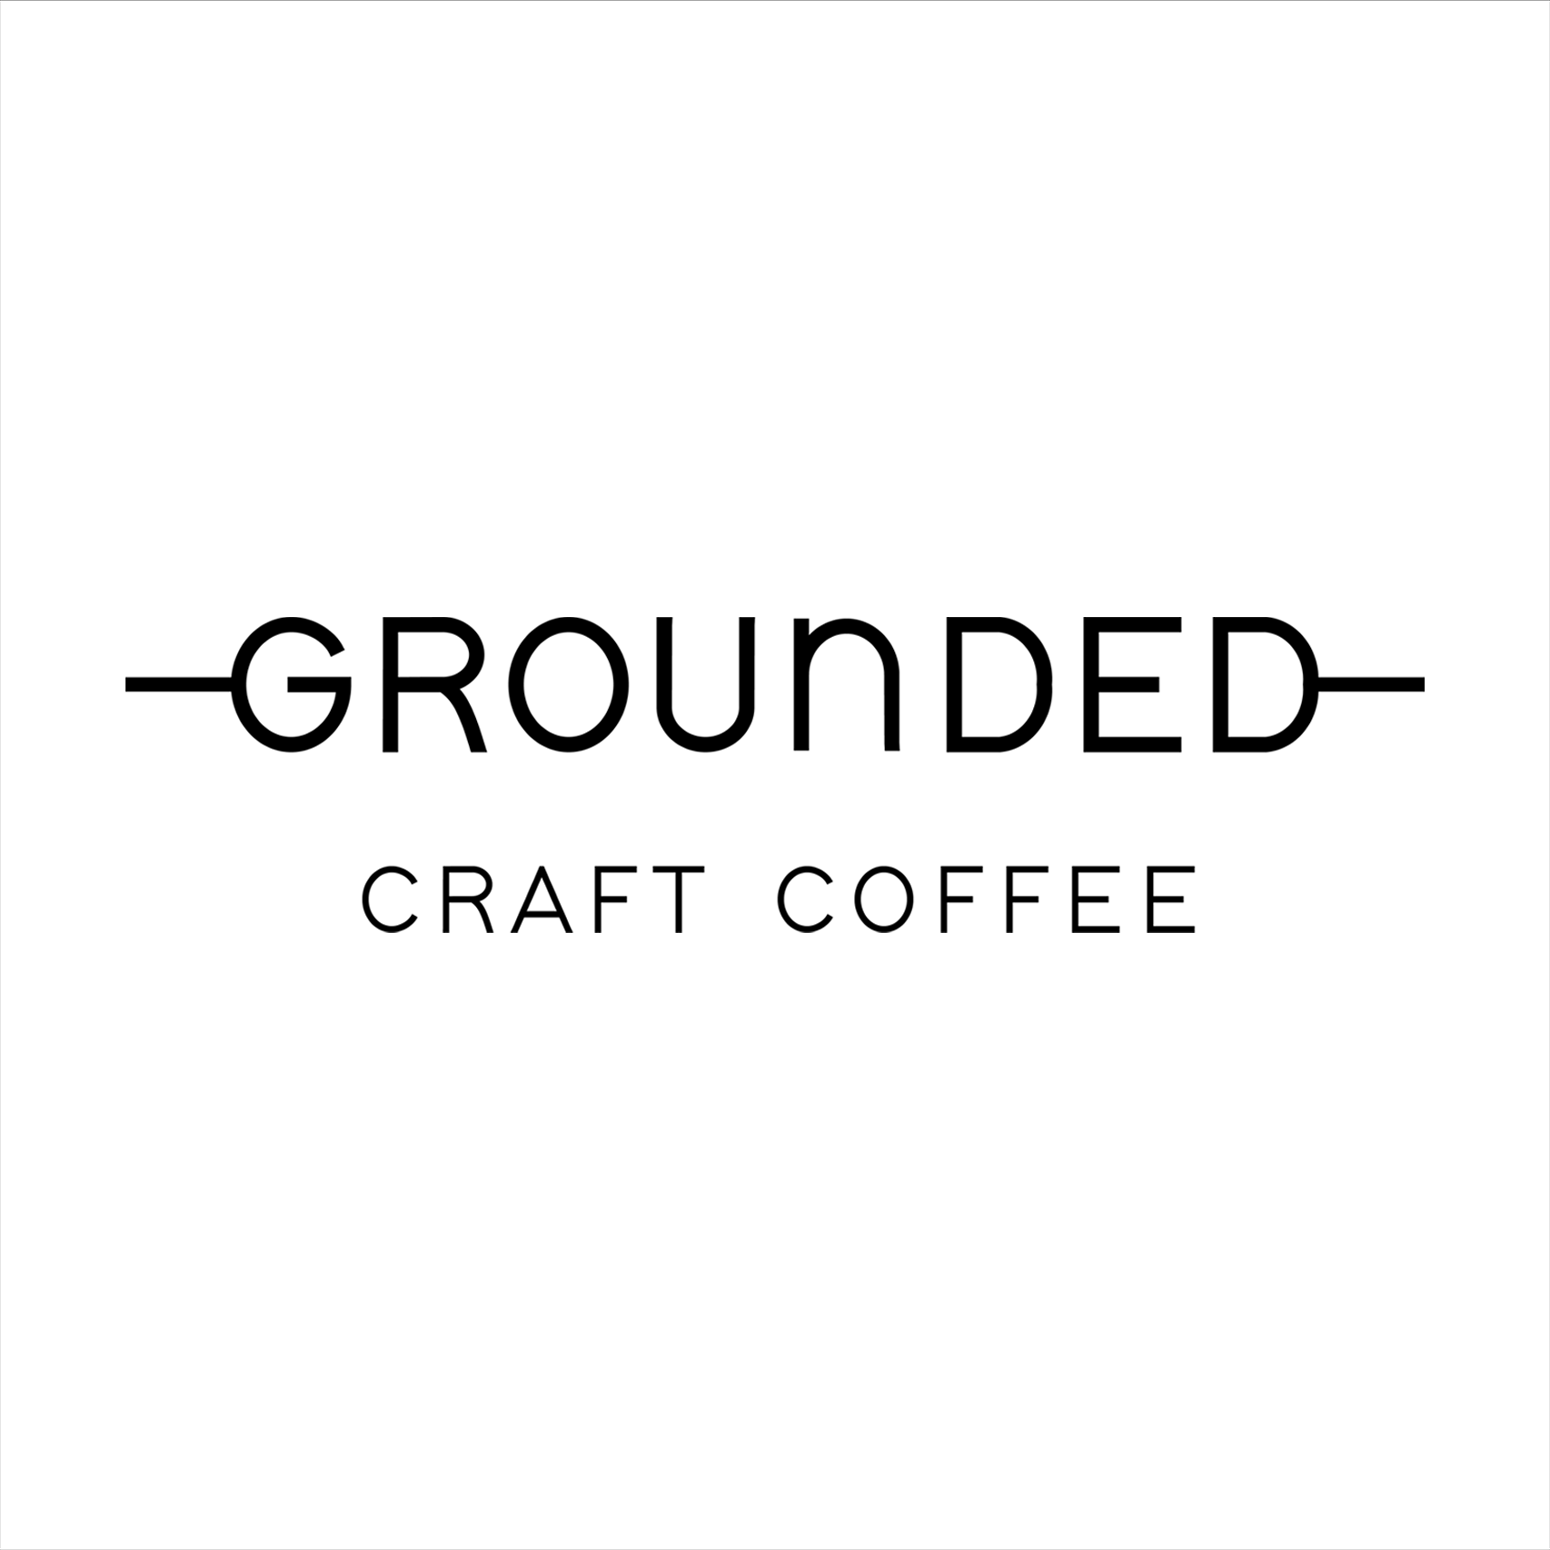 Grounded Craft Coffee